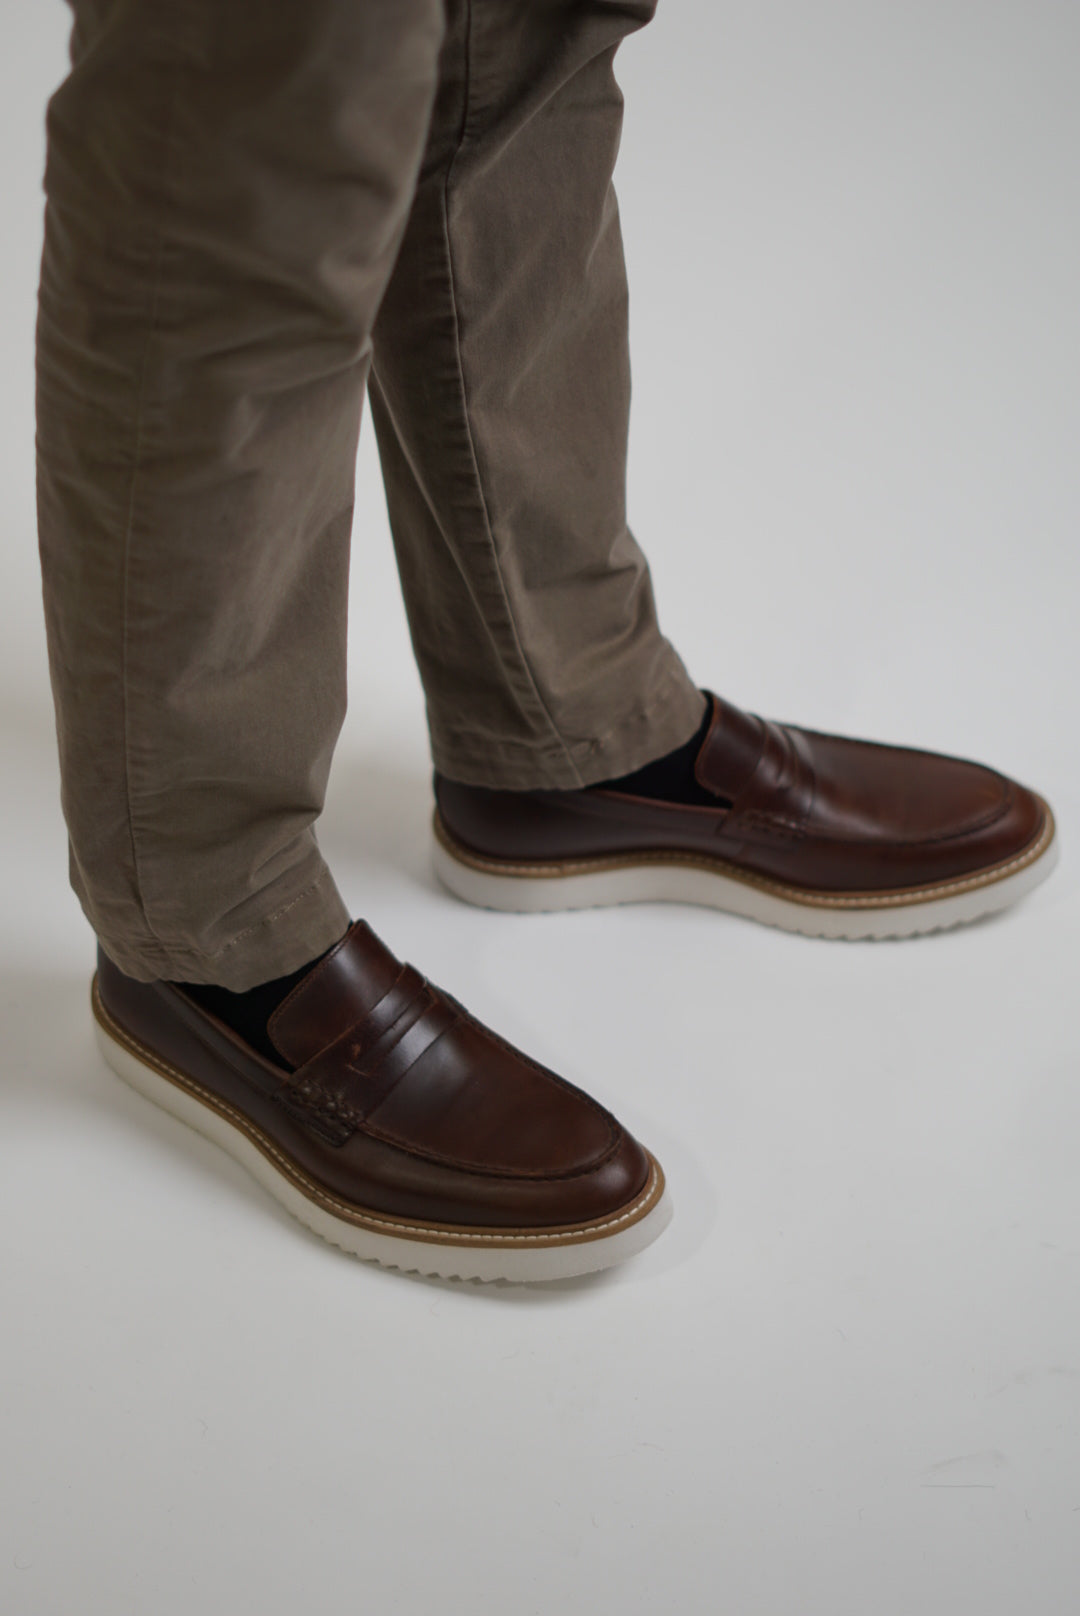 Clarks Dark Tan Leather Loafers